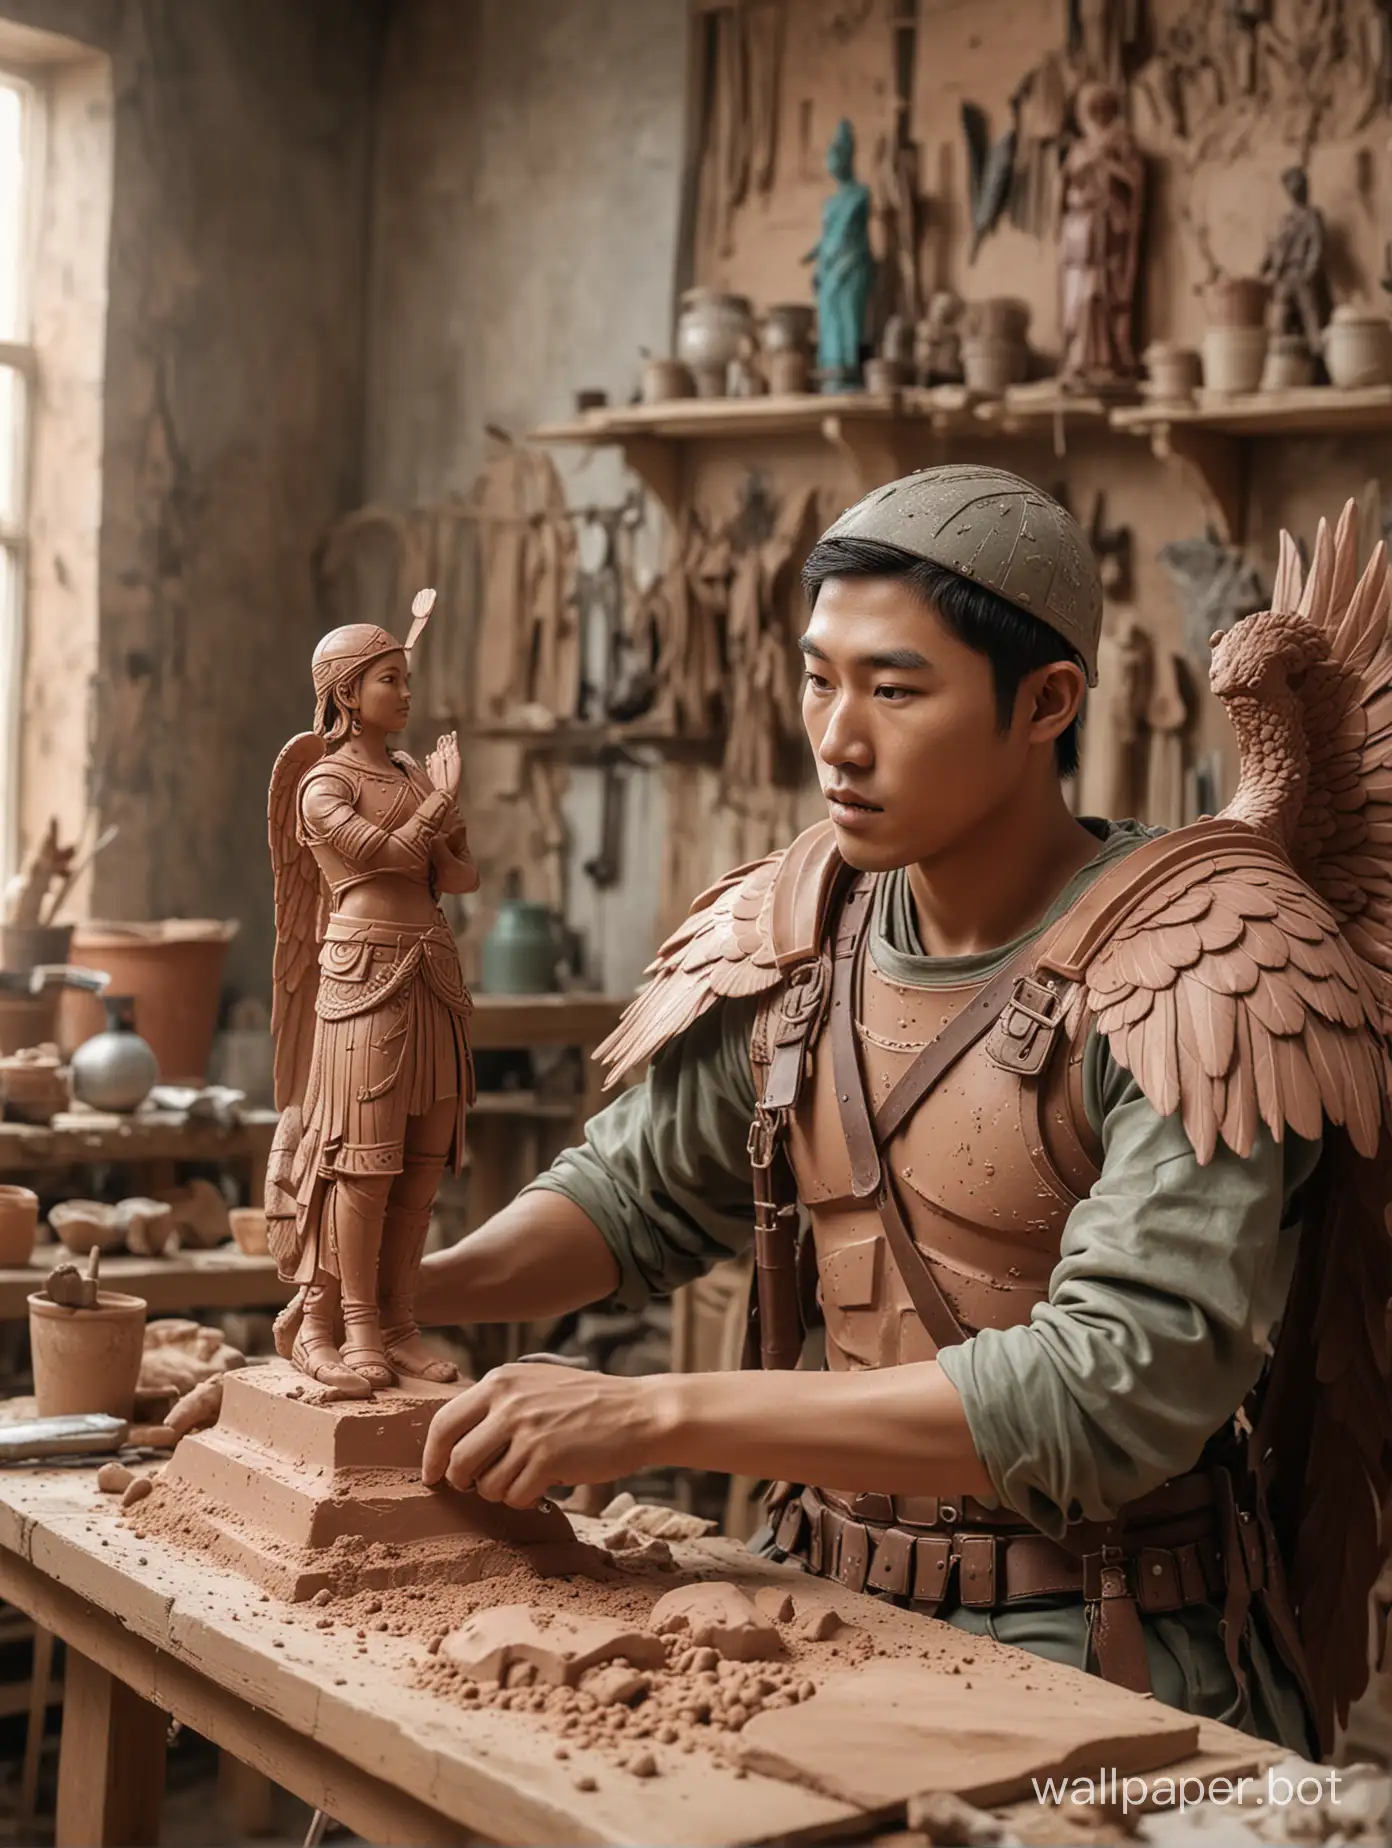 Imagine a scene of 22 year old Asian male wearing a helmet with wings and Roman soldier armor. He is sculpting a clay female figurine in a workshop.  Cinematic, use creative, unrealistic, and explosive pastel colors to fill the background